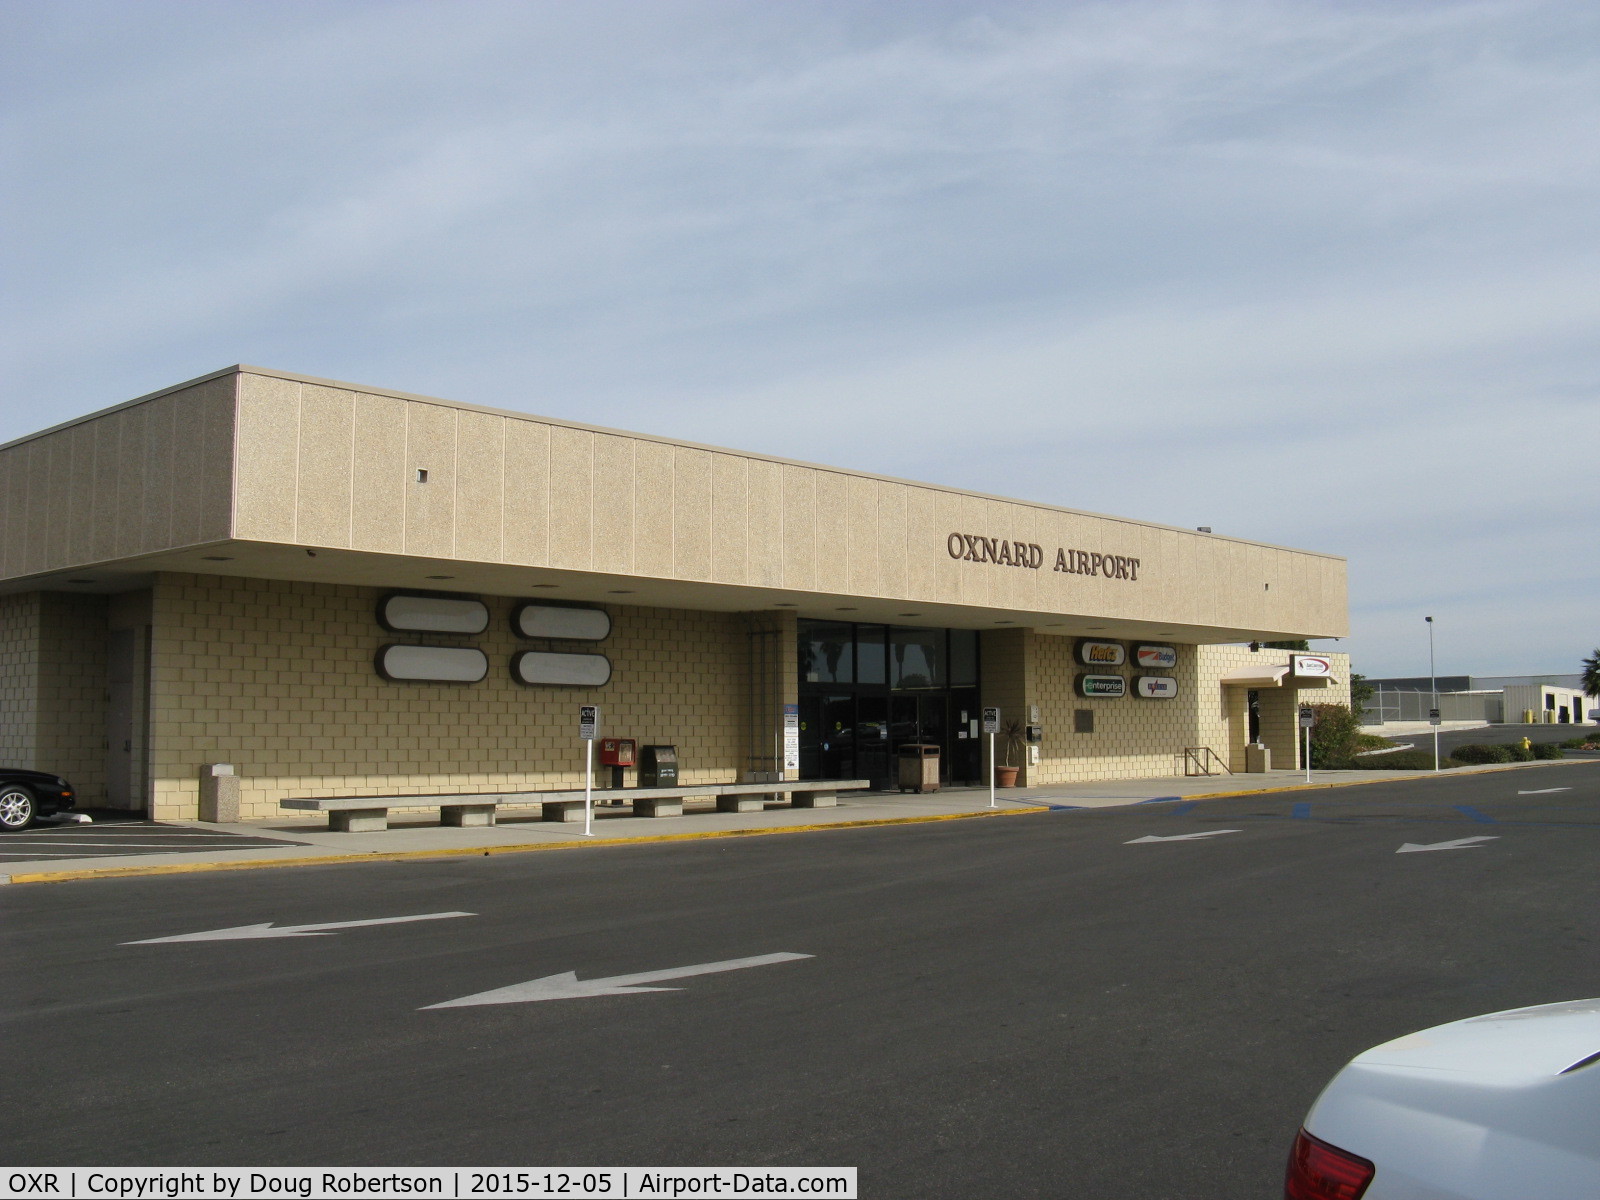 Oxnard Airport (OXR) - Oxnard Airport Terminal Building. No commercial commuter passenger flights have been offered to/from OXR since Summer 2010. The terminal only provides various rental vehicle services. Note the four blank placards.